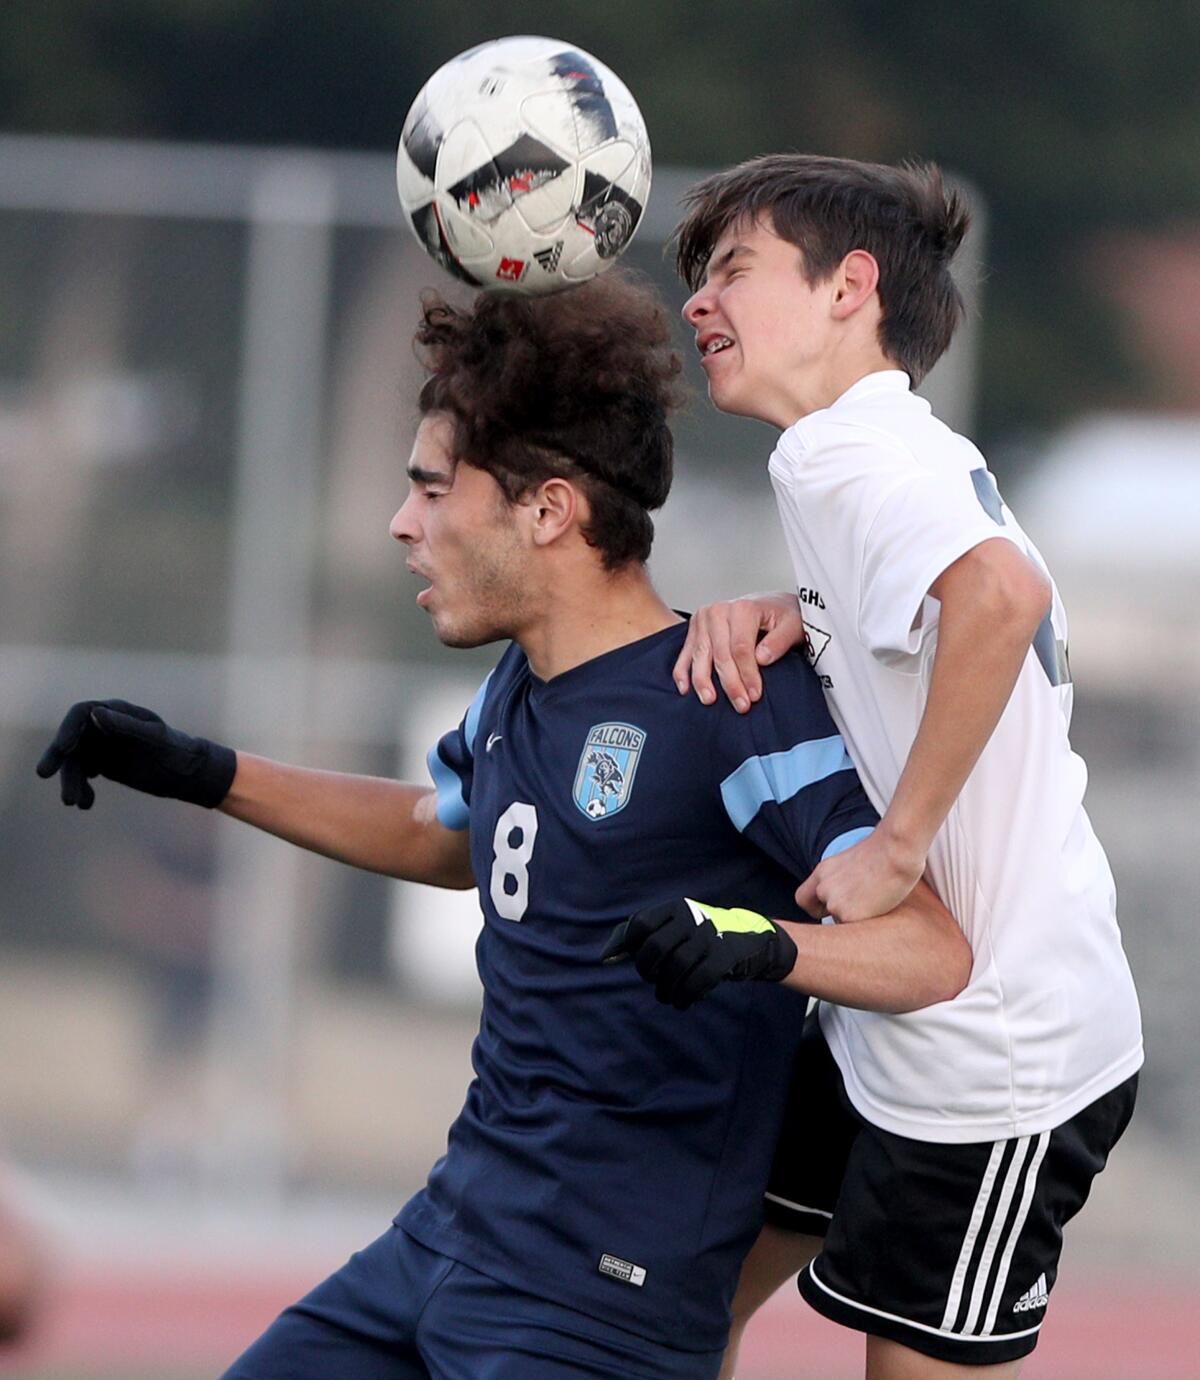 Crescenta Valley High player Argin Baharians, left, heads the ball as Burroughs Zac Levy goes up as well in game at Crescenta Valley High in La Crescenta on Friday, Dec. 13, 2019.